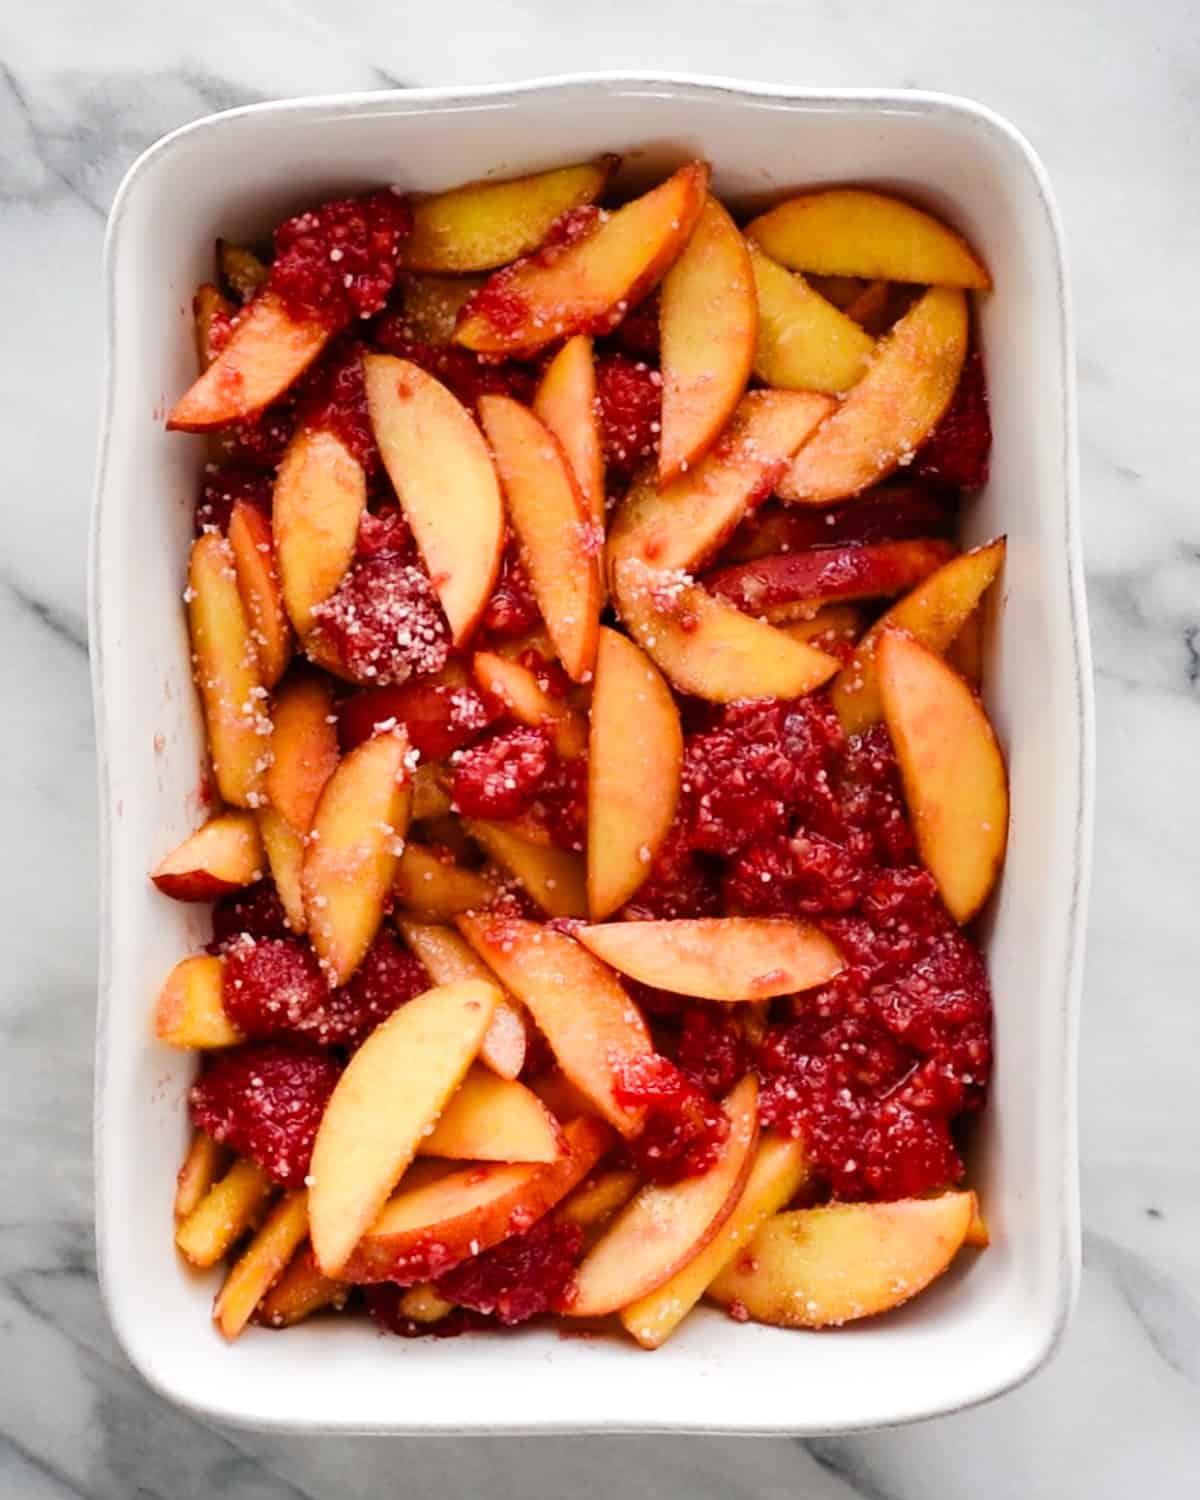 raspberry peach crisp filling spread into a baking dish before making